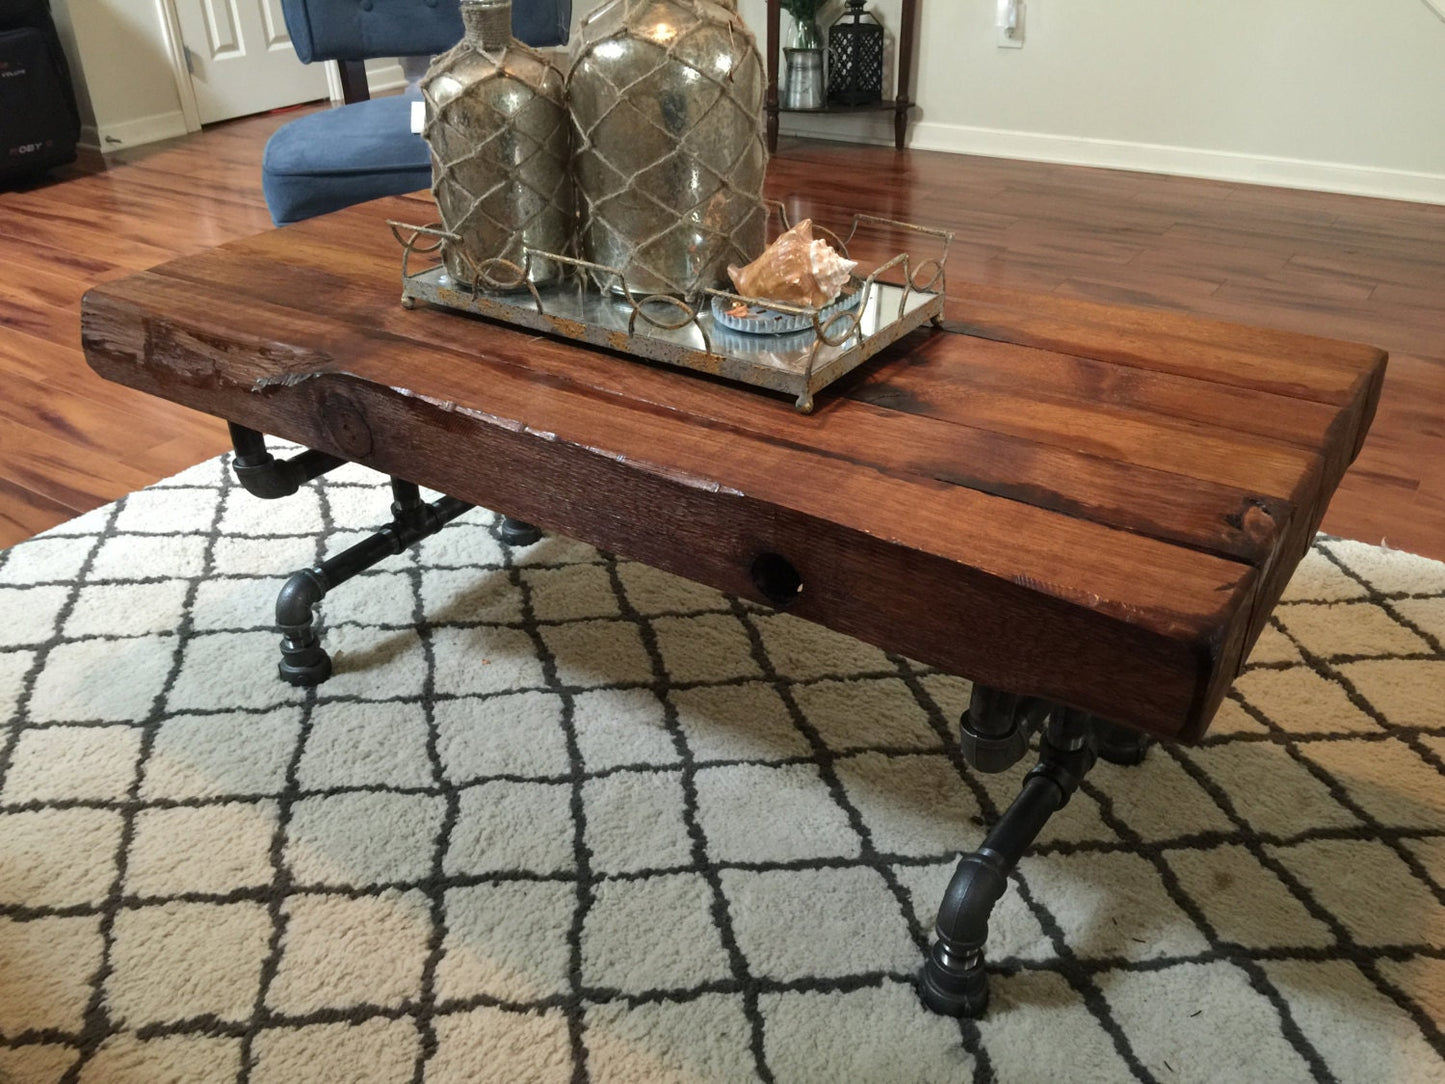 Steel and Cedar Wood Coffee Table - 3.5in Thick Table Top